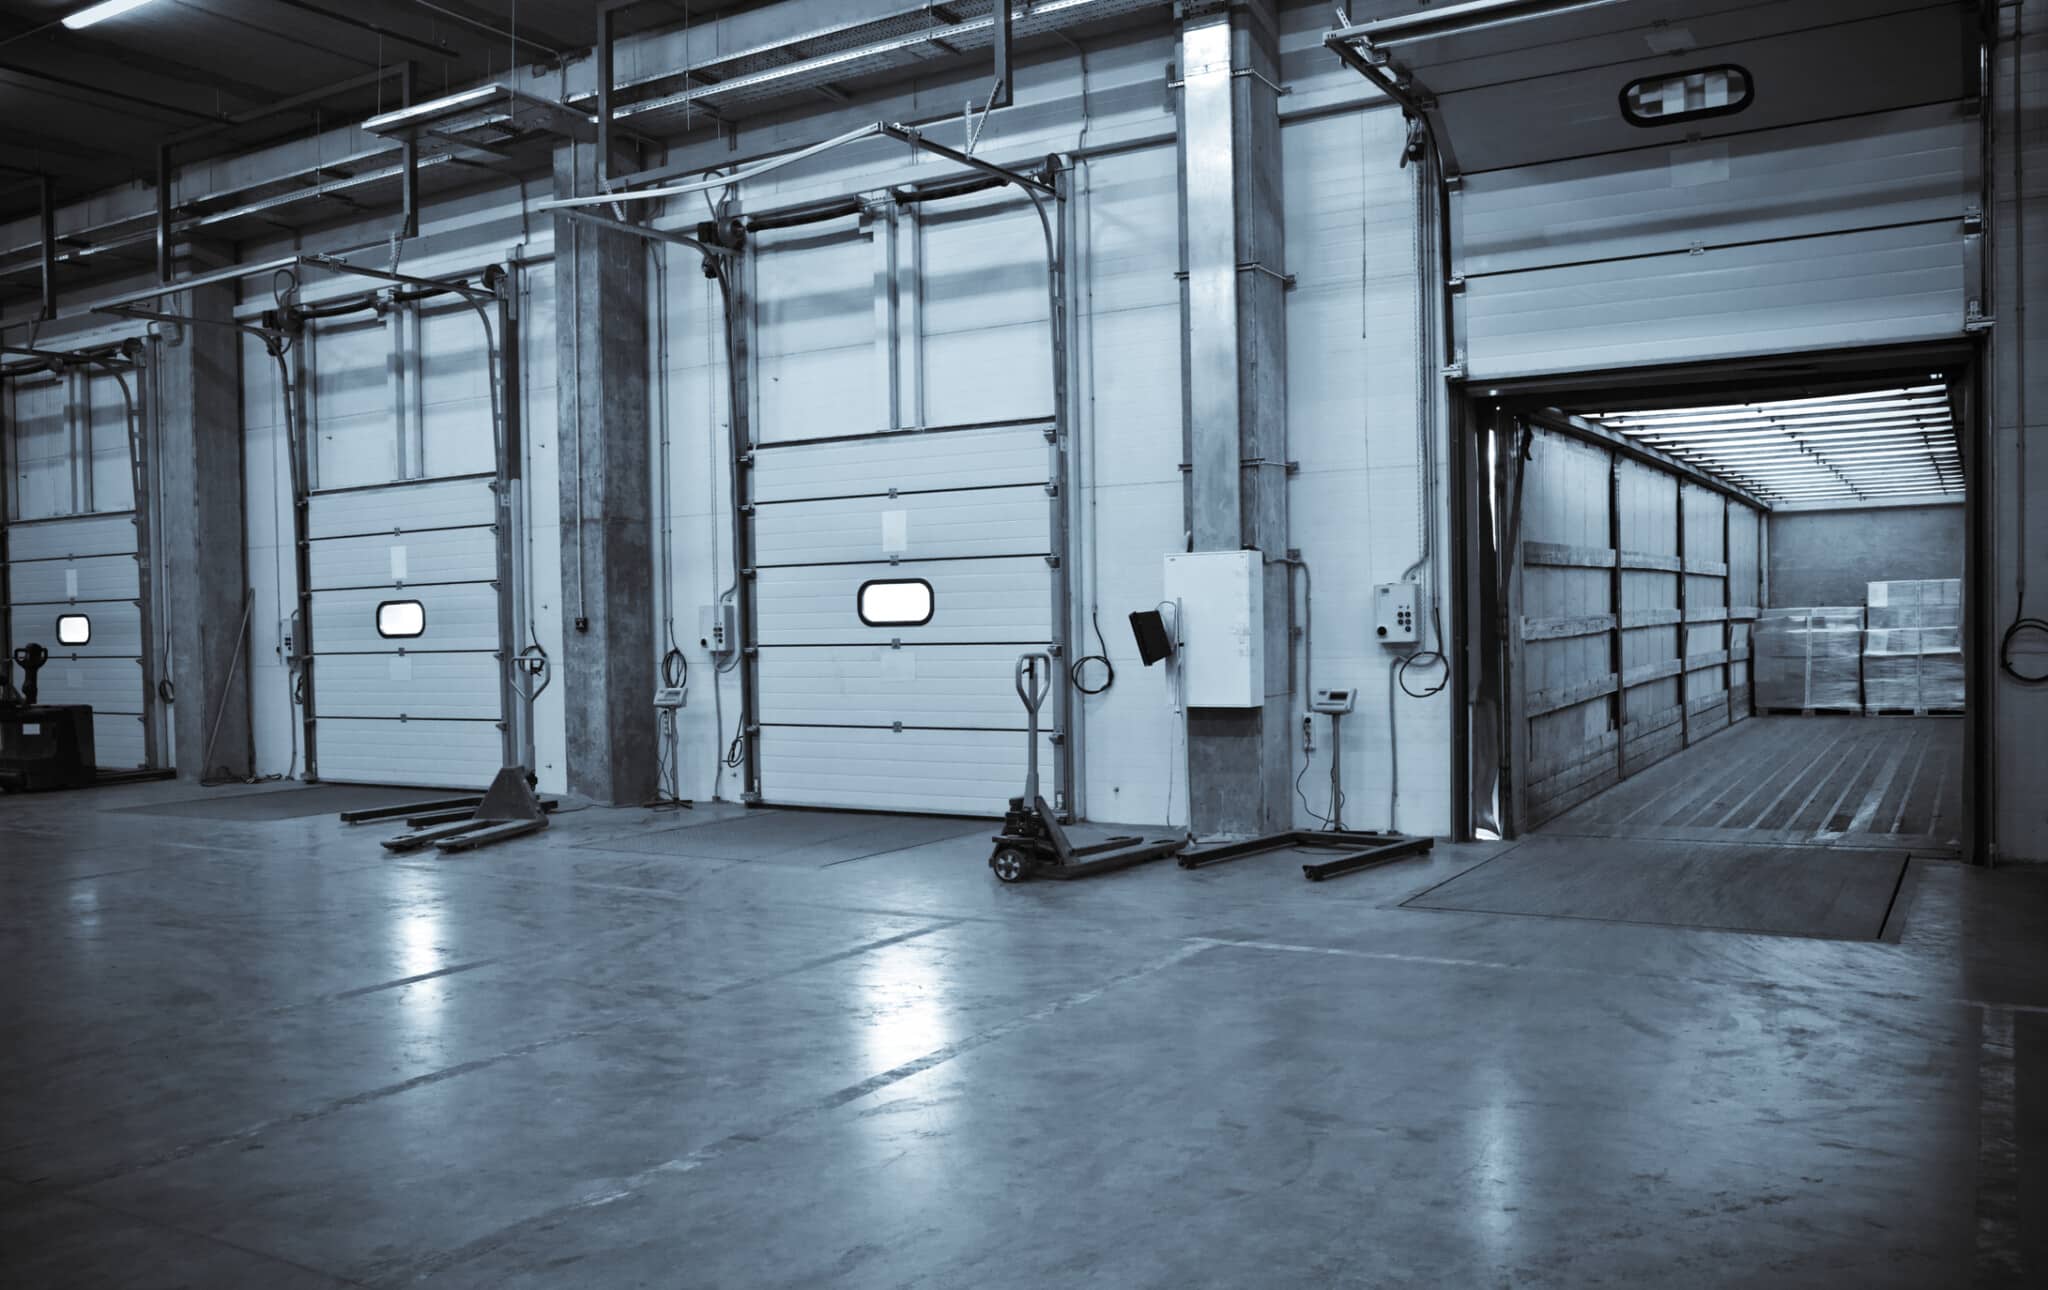 Overhead doors in various states of open and closed at a loading and unloading dock for truck trailers.